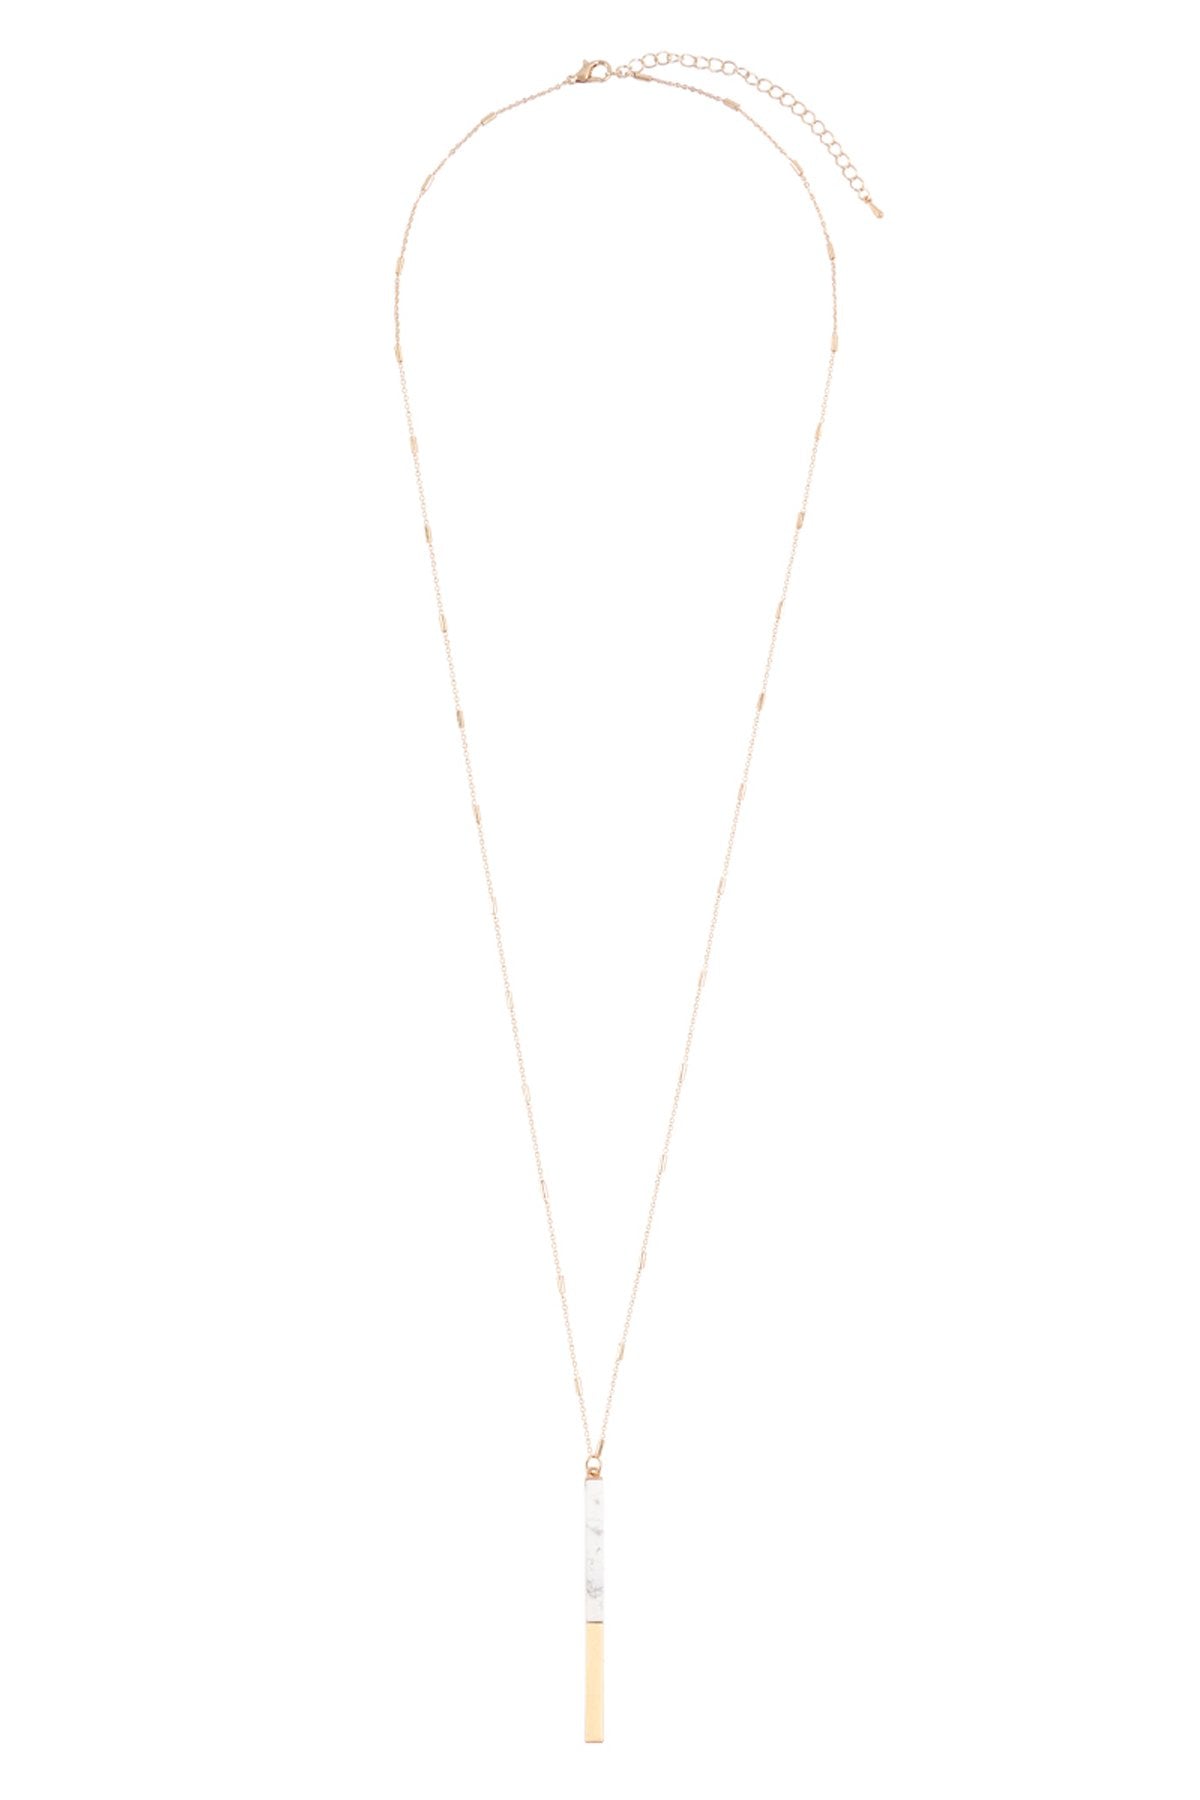 Myn1354 - Natural Stone With Metal Bar Necklace - LOLA LUXE